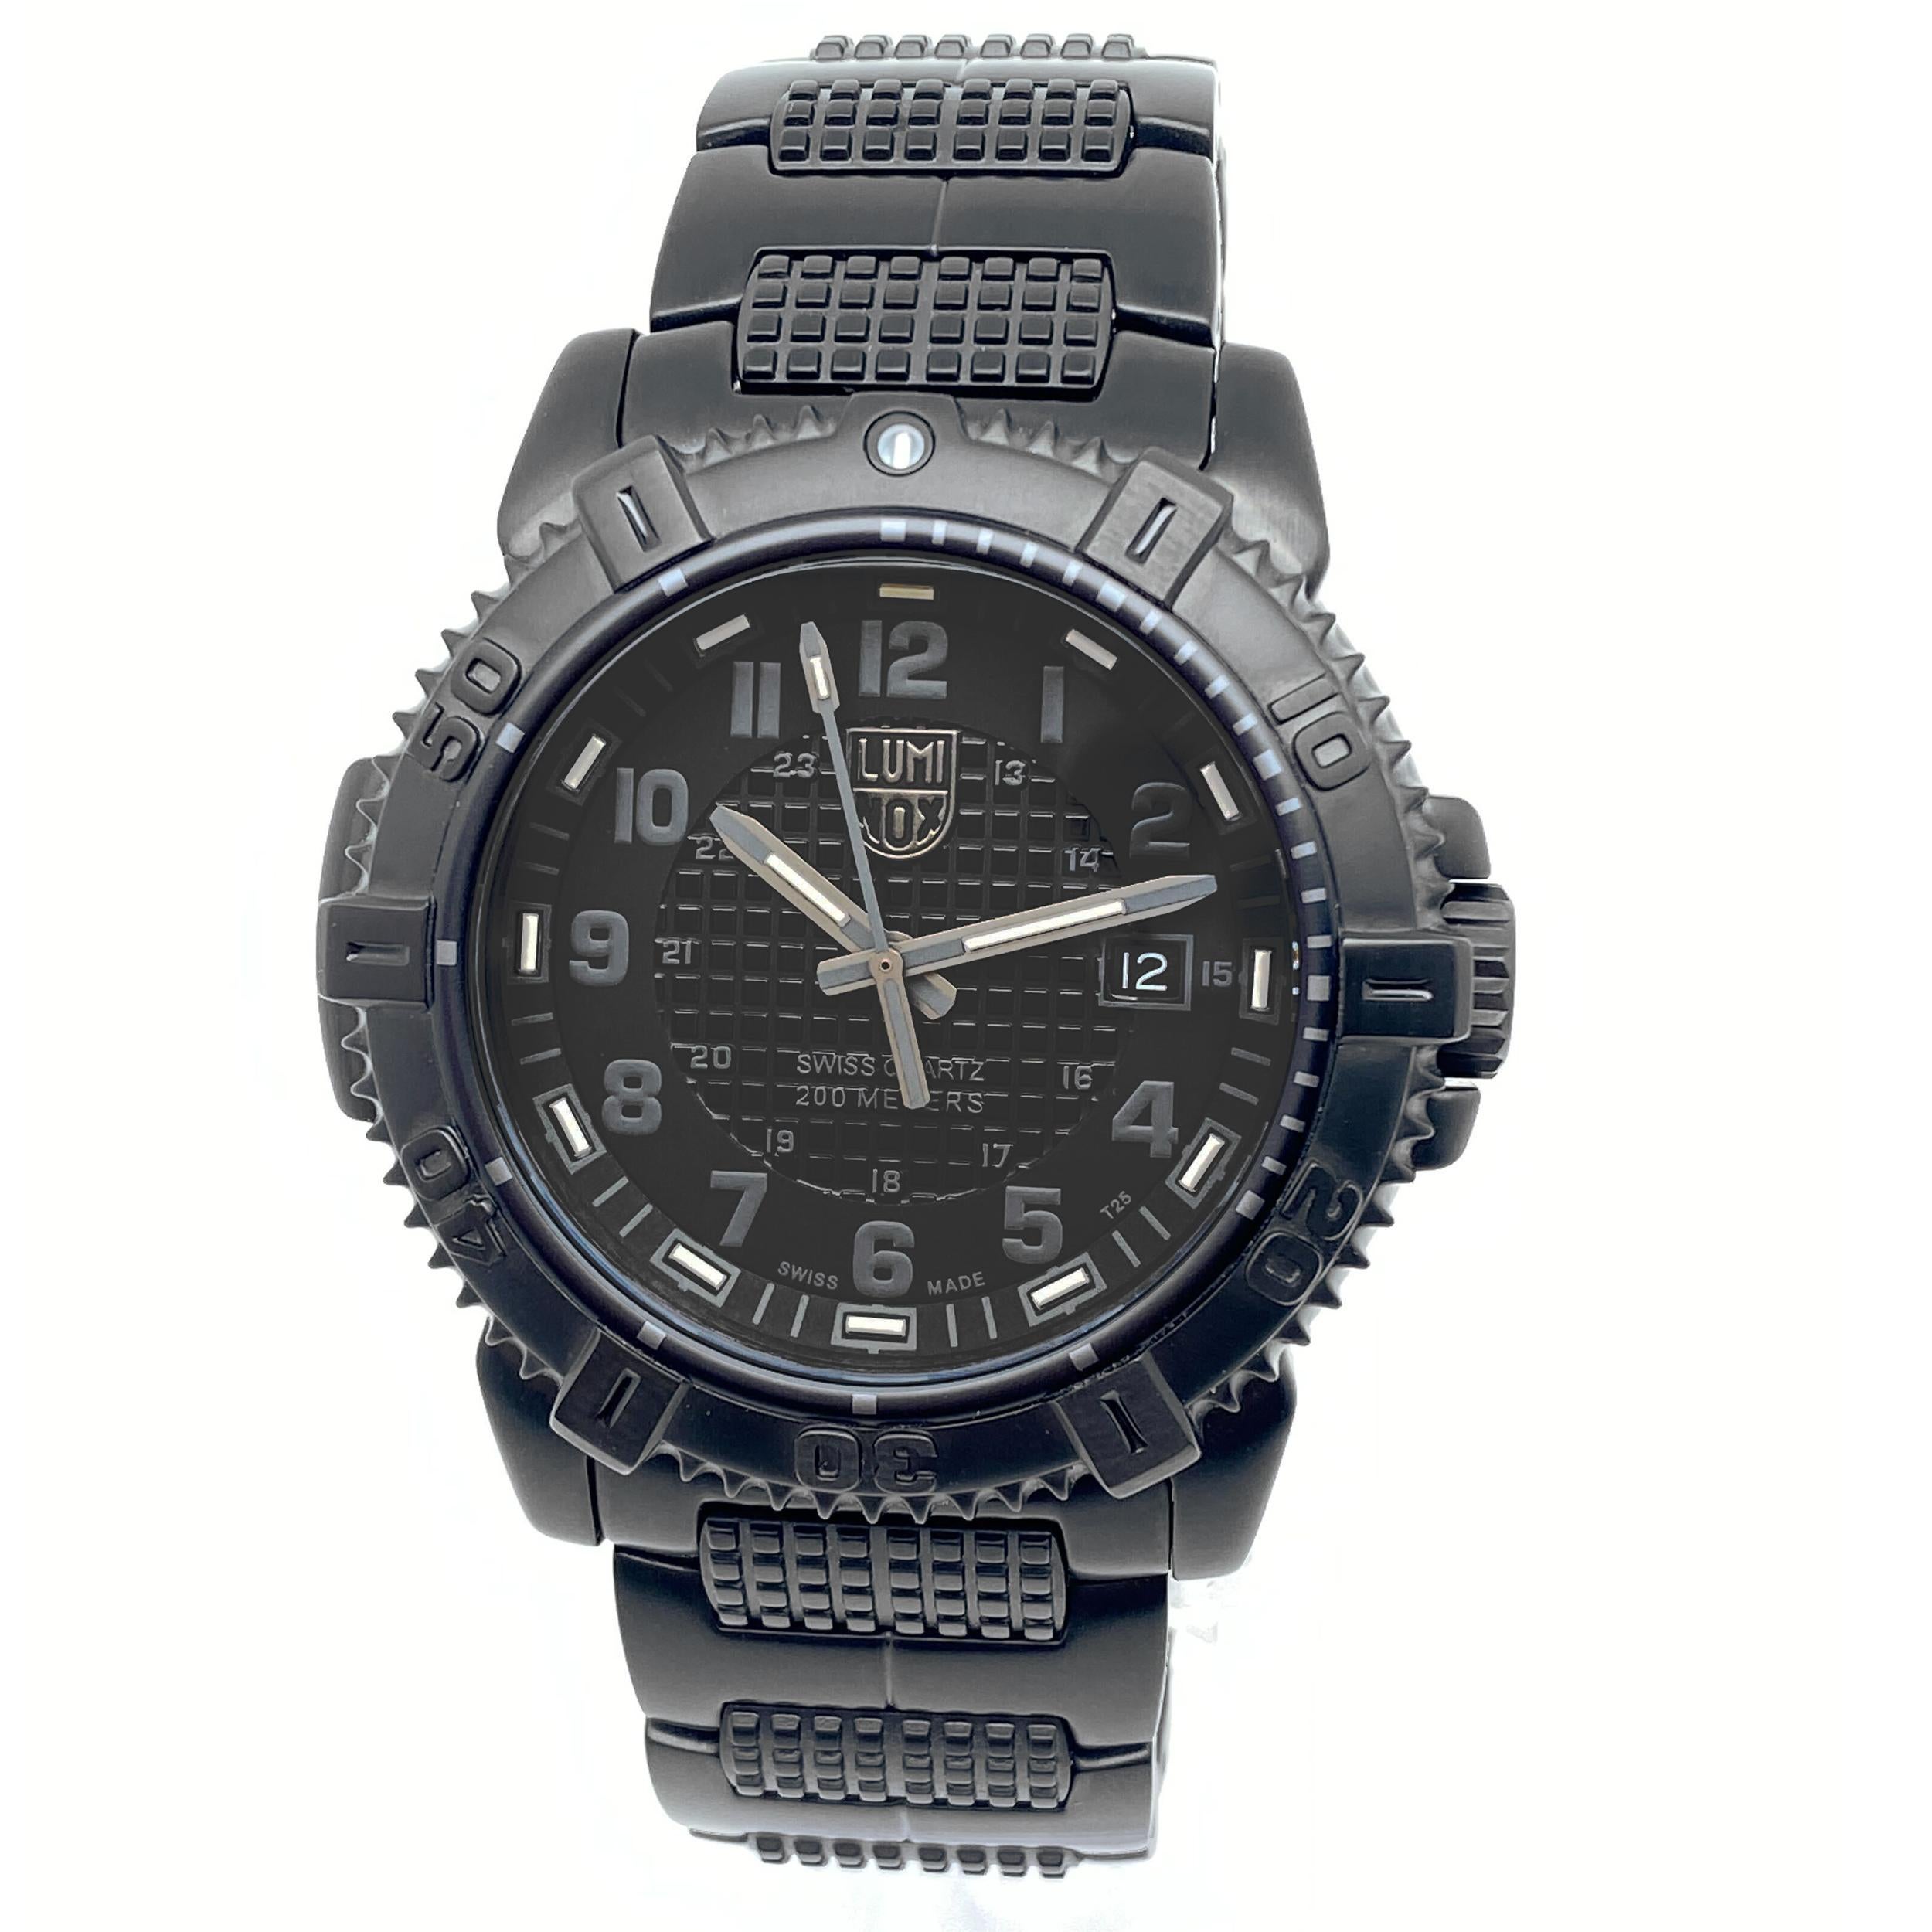 This Luminox wristwatch is a pre-owned item in excellent condition! There are no scratches on the bezel or case, and only a few scuffs and scratches on the bracelet and clasp. The watch comes with the original packaging but no paperwork. Covered by